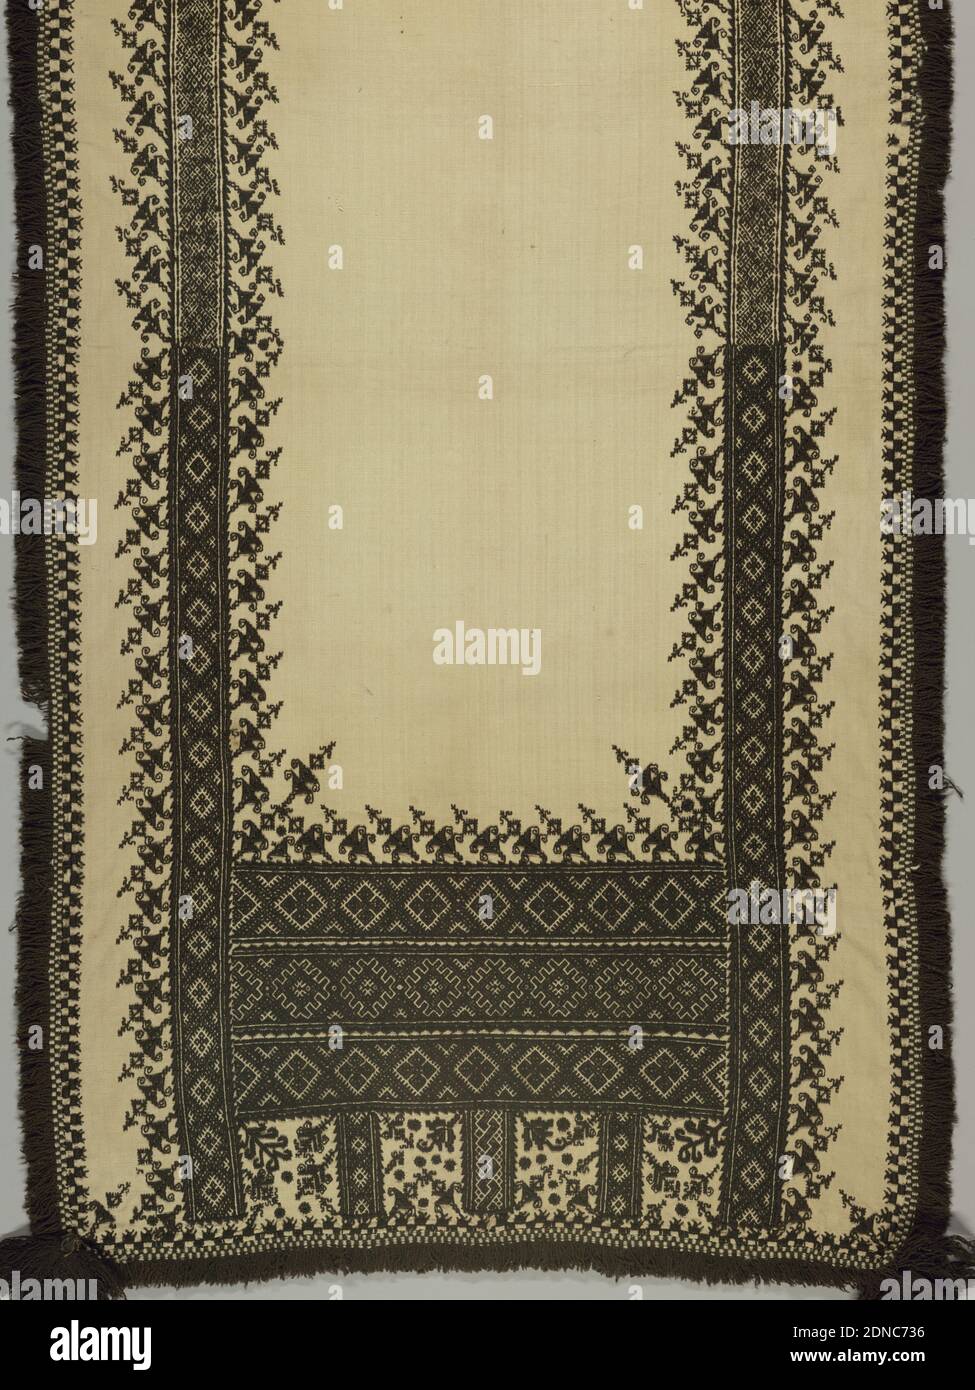 Panel, Medium: linen, wool Technique: embroidered in cross and satin stitch, Oblong panel of heavy cream white hand-woven linen embroidered in black wool and trimmed with fringe of black wool and black tassels at each corner. Borders at side and deep border at end, with a highly stylized plant form, detached and placed at a slant, above borders of geometric forms. Cross and satin stitch., Spain, 18th–early 19th century, embroidery & stitching, Panel Stock Photo